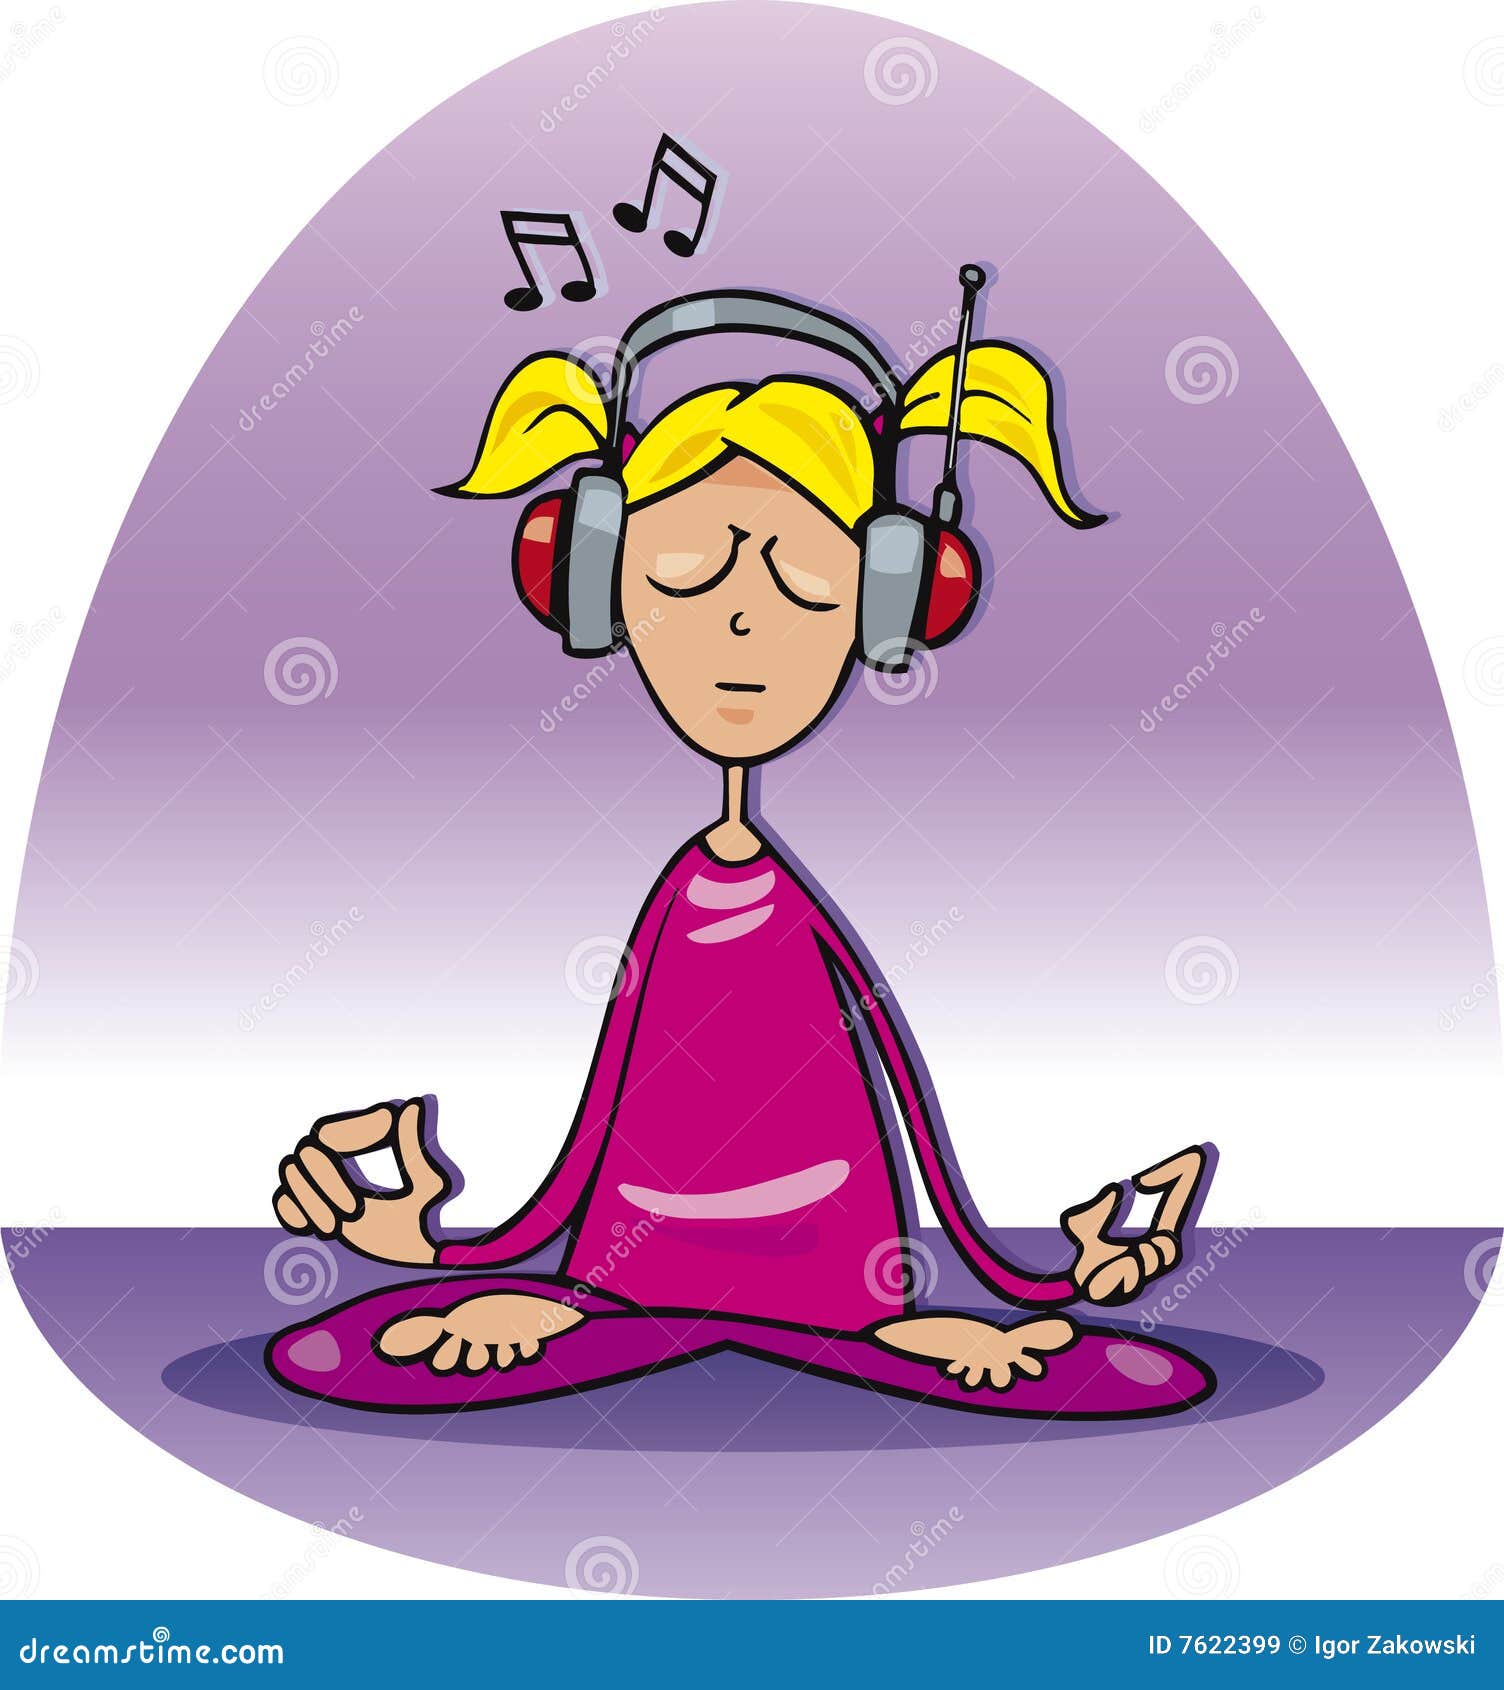 Cartoon illustration of cute blonde girl relax and listen to the music ...